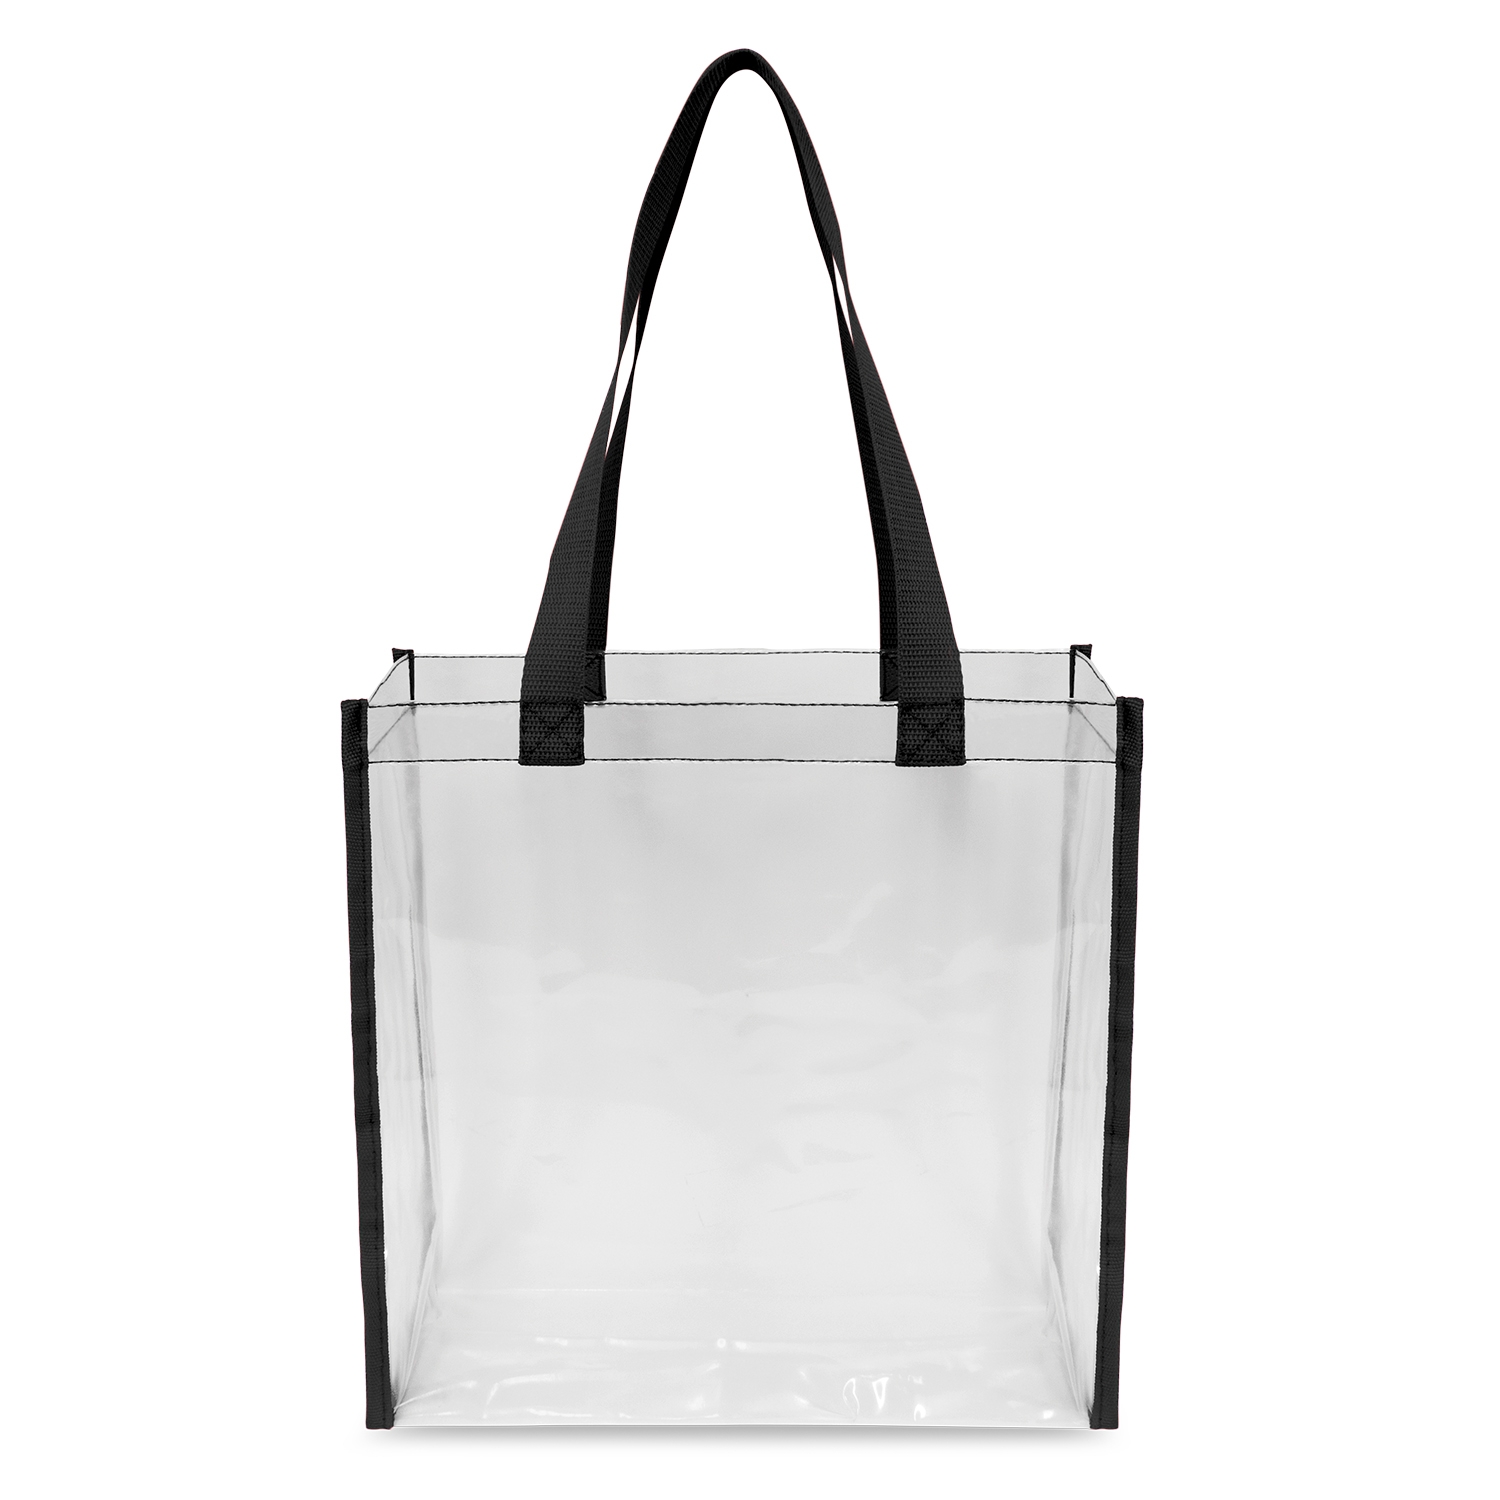 TRENDS | Clarity Tote Bag